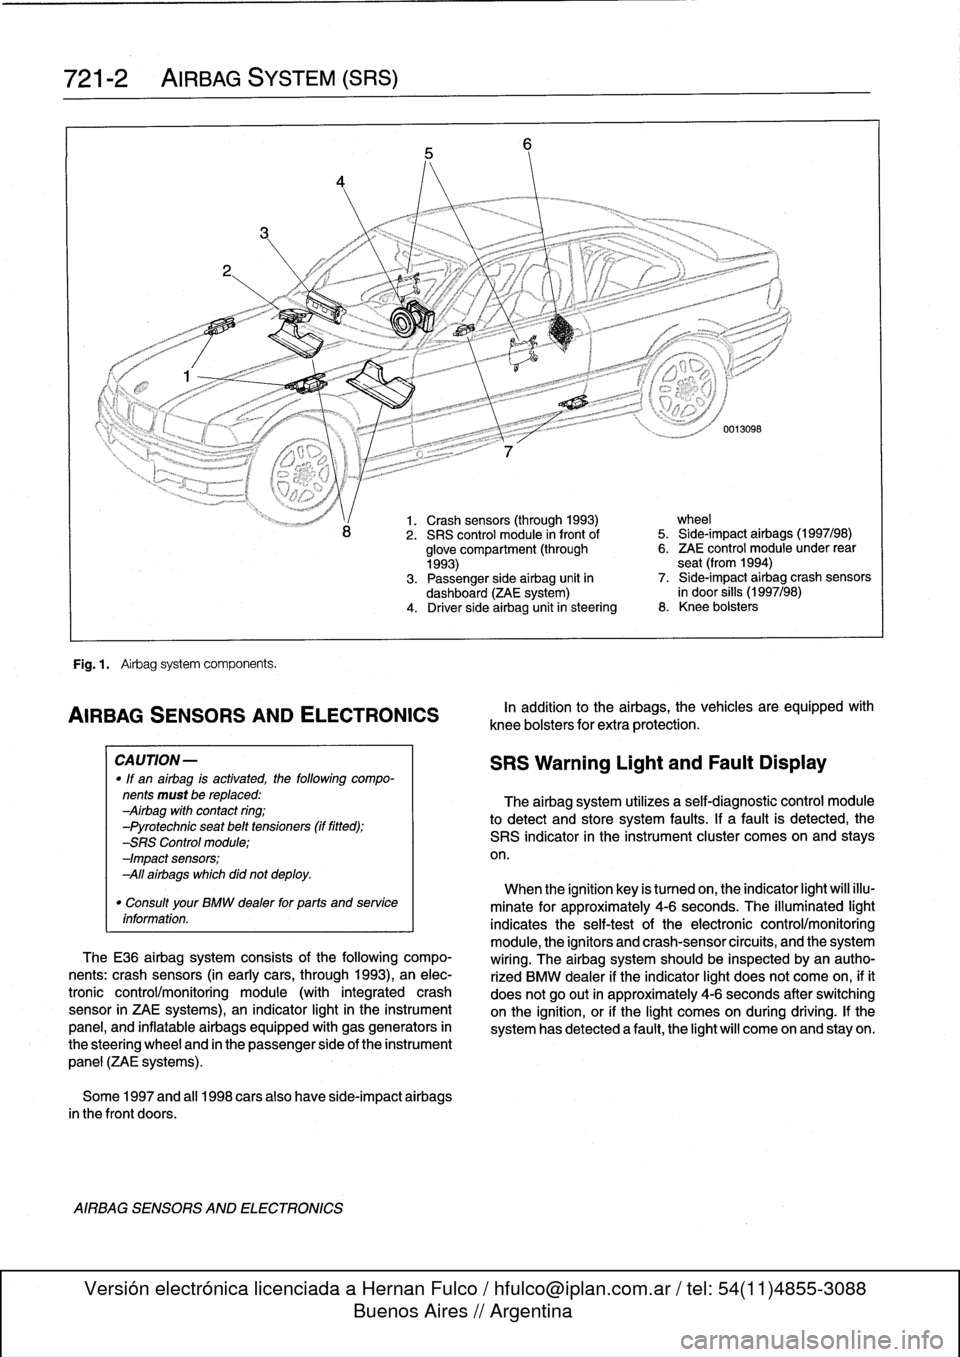 BMW M3 1993 E36 Repair Manual 
721-2

	

AIRBAG
SYSTEM
(SRS)

Fig
.
1
.

	

Airbag
system
components
.

AIRBAG
SENSORSAND
ELECTRONICS

CA
UTION-

"
If
an
airbag
is
activated,
the
following
compo-
nents
must
be
replaced
:
Airbag
wi